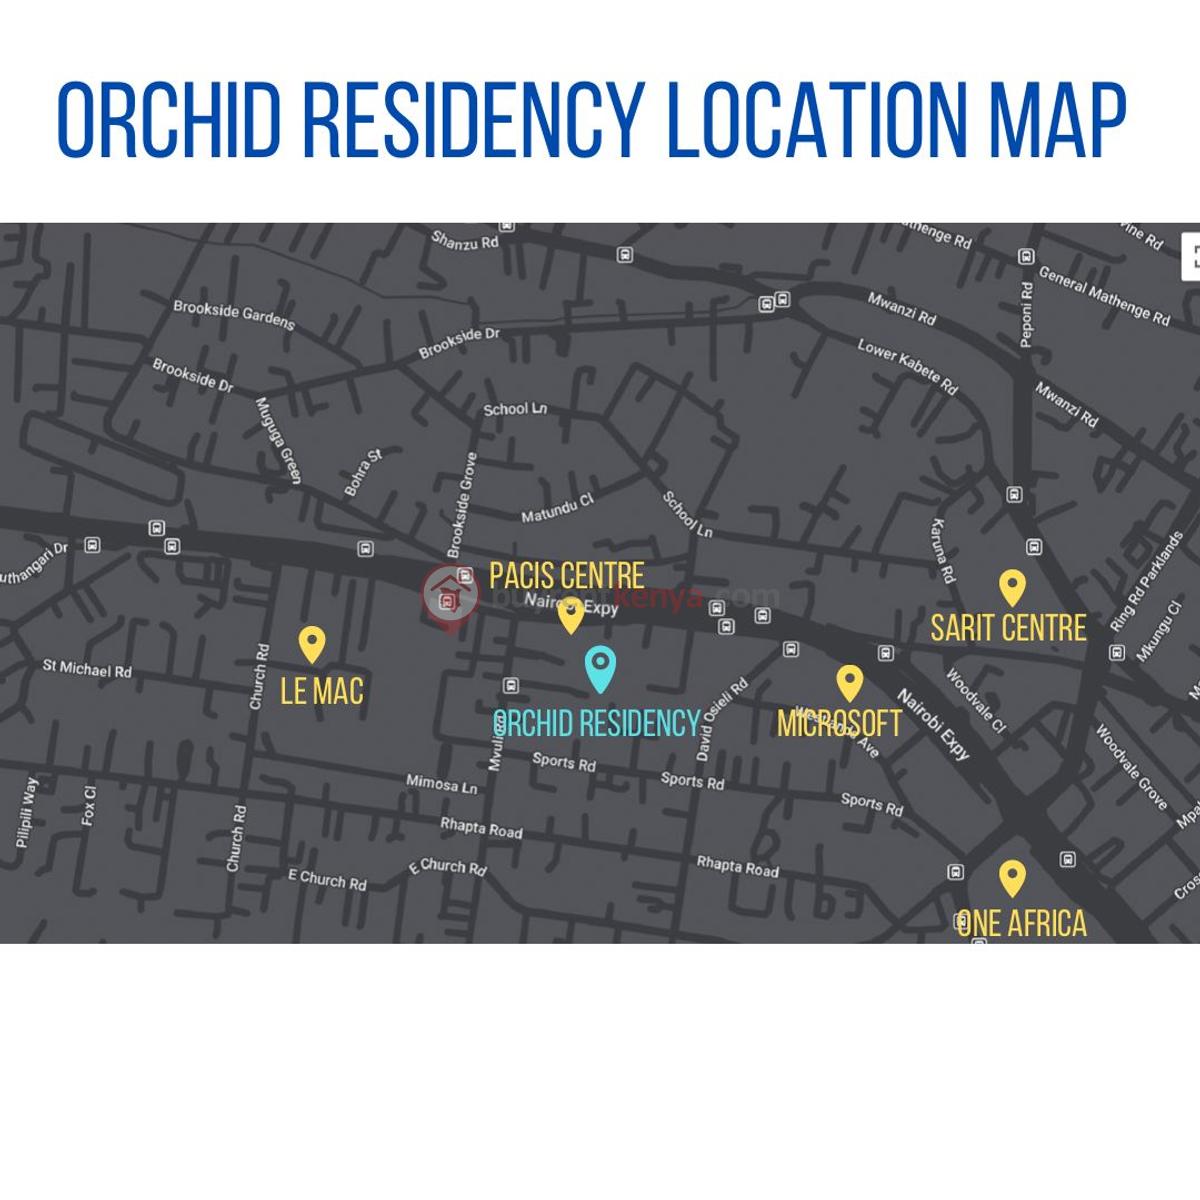 LOCATION MAP ORCHID